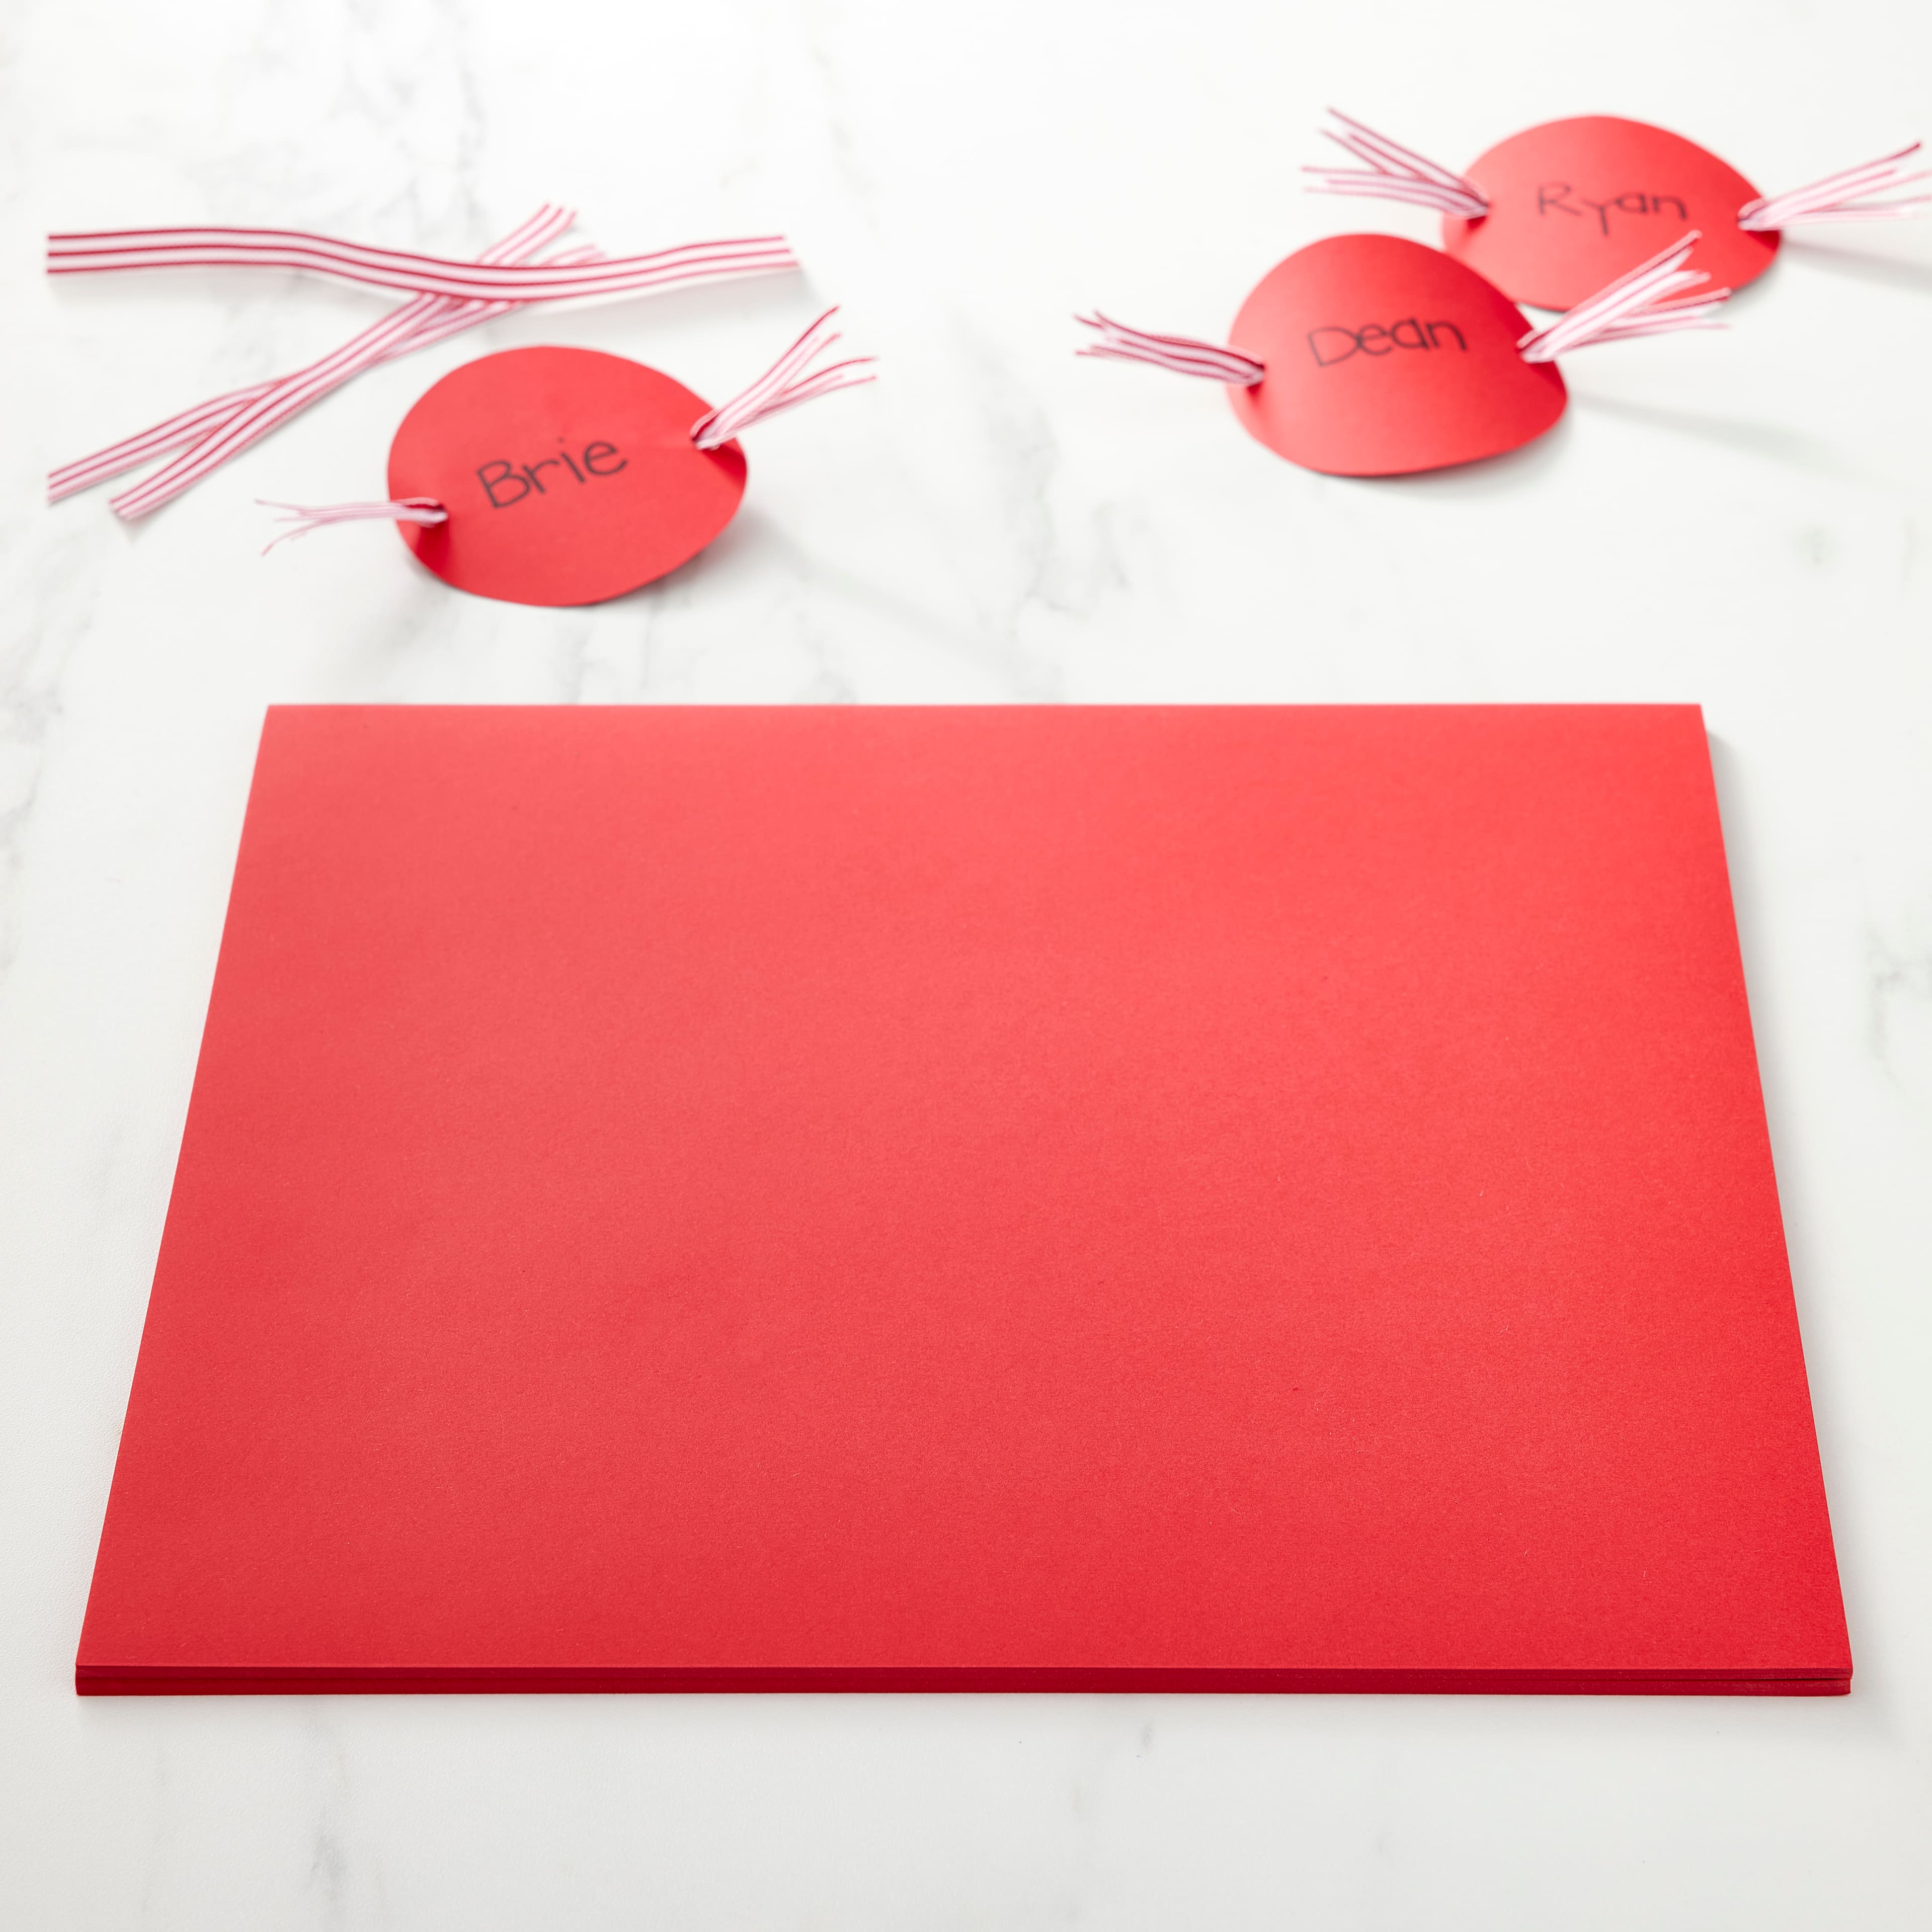 Red Palette 12 x 12 Cardstock Paper by Recollections™, 100 Sheets